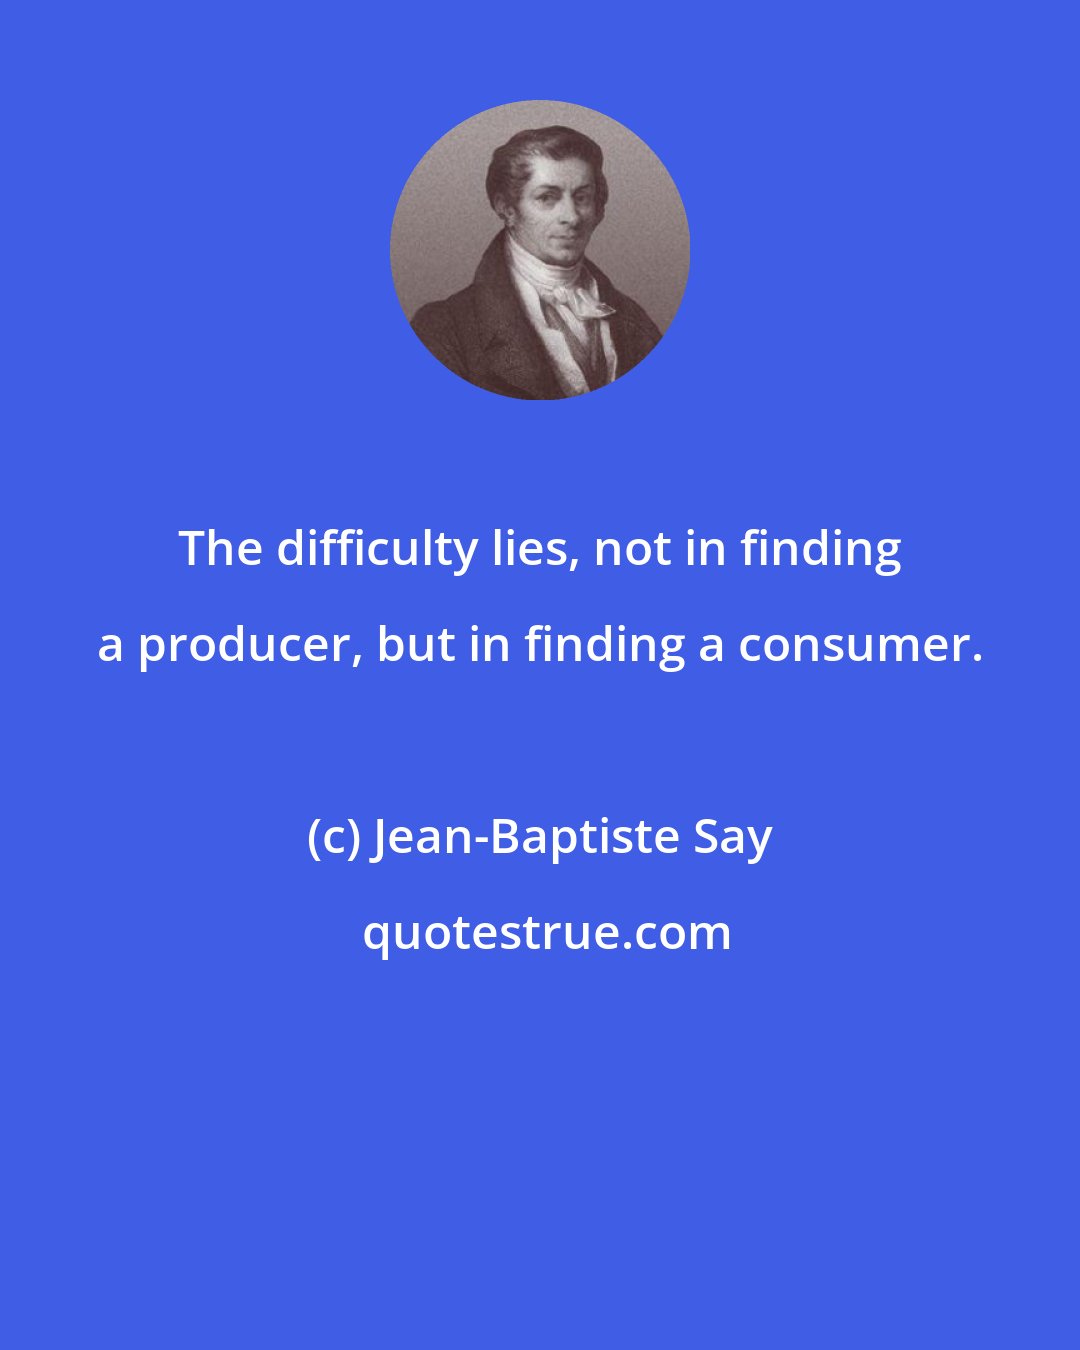 Jean-Baptiste Say: The difficulty lies, not in finding a producer, but in finding a consumer.